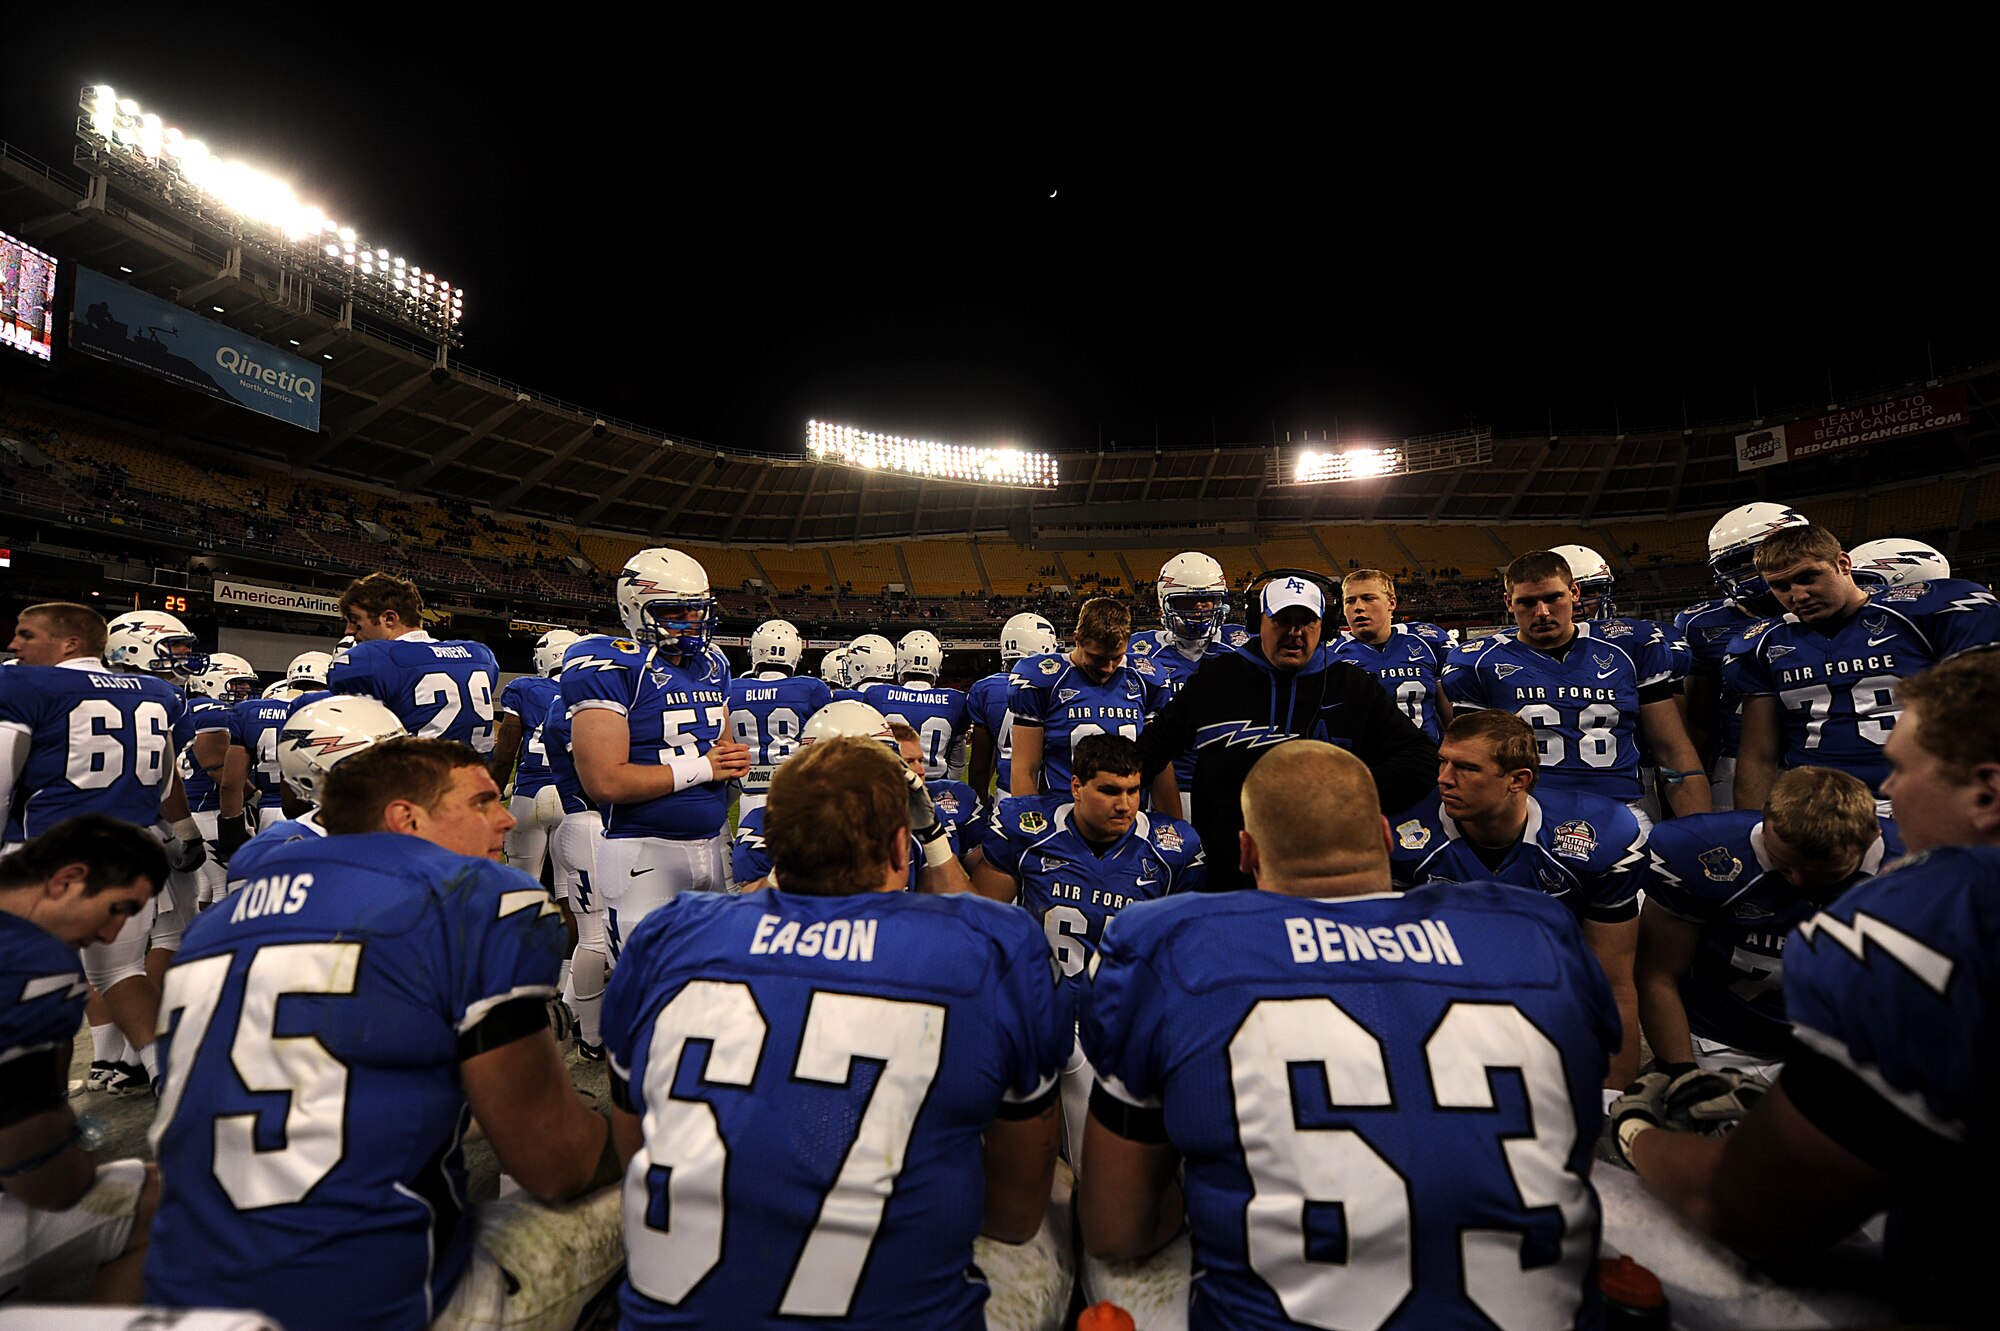 The U.S. Air Force Academy football team listens to the coach in between plays during their game against Toledo University on December 28, 2011 at RFK stadium for the 2011 Military Bowl. Toledo won the game with a 42-41 victory. (U.S. Air Force Photo by: MSgt Jeremy Lock) (Released)

